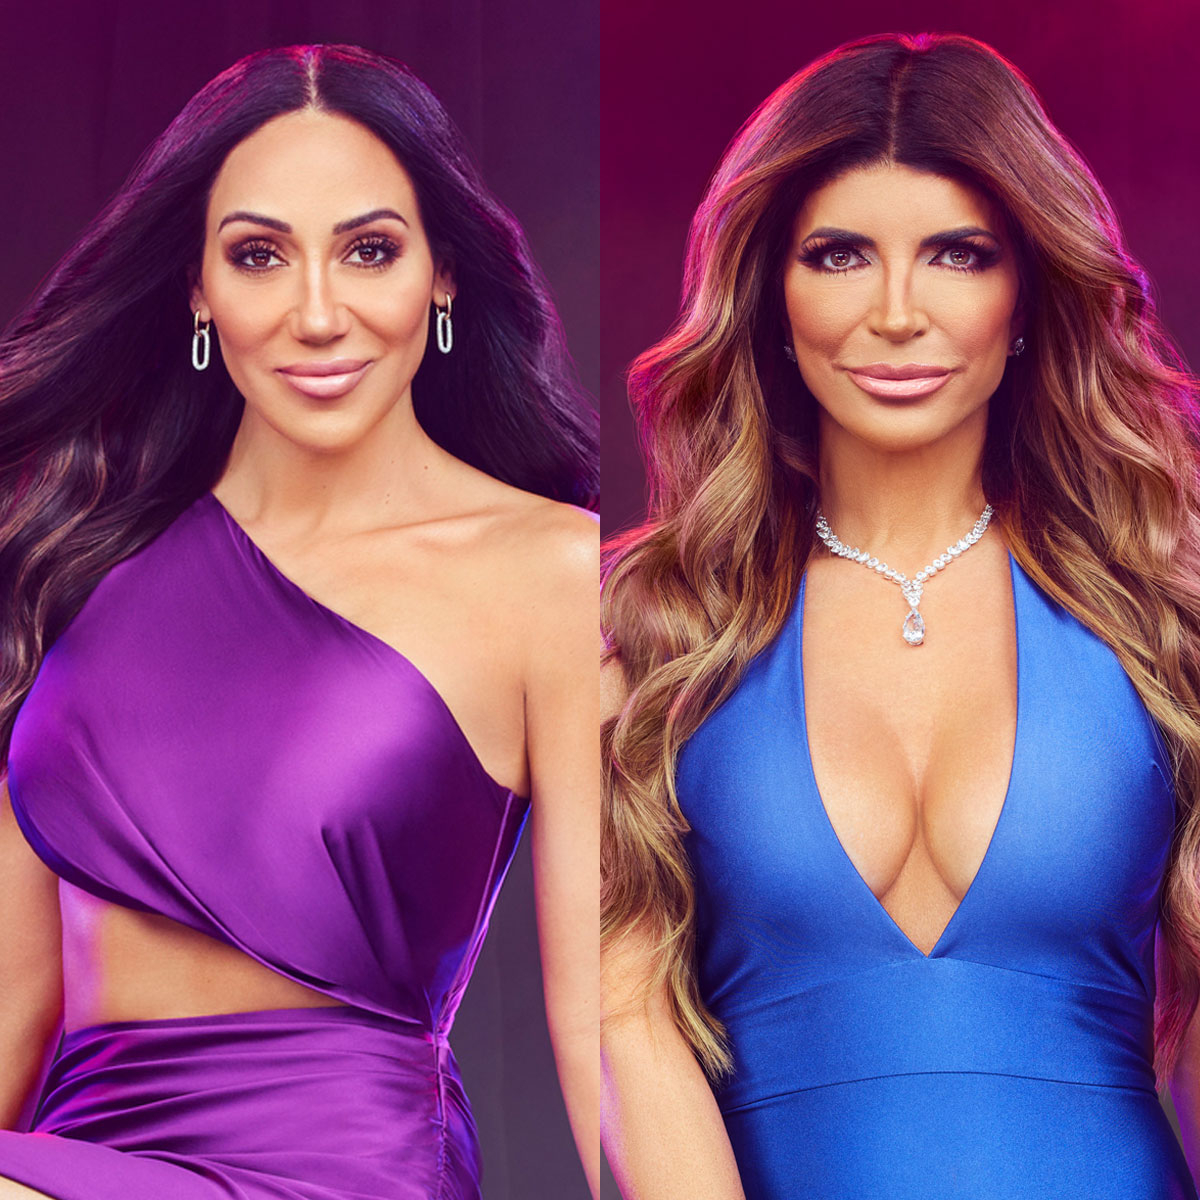 Watch The Real Housewives of New Jersey online